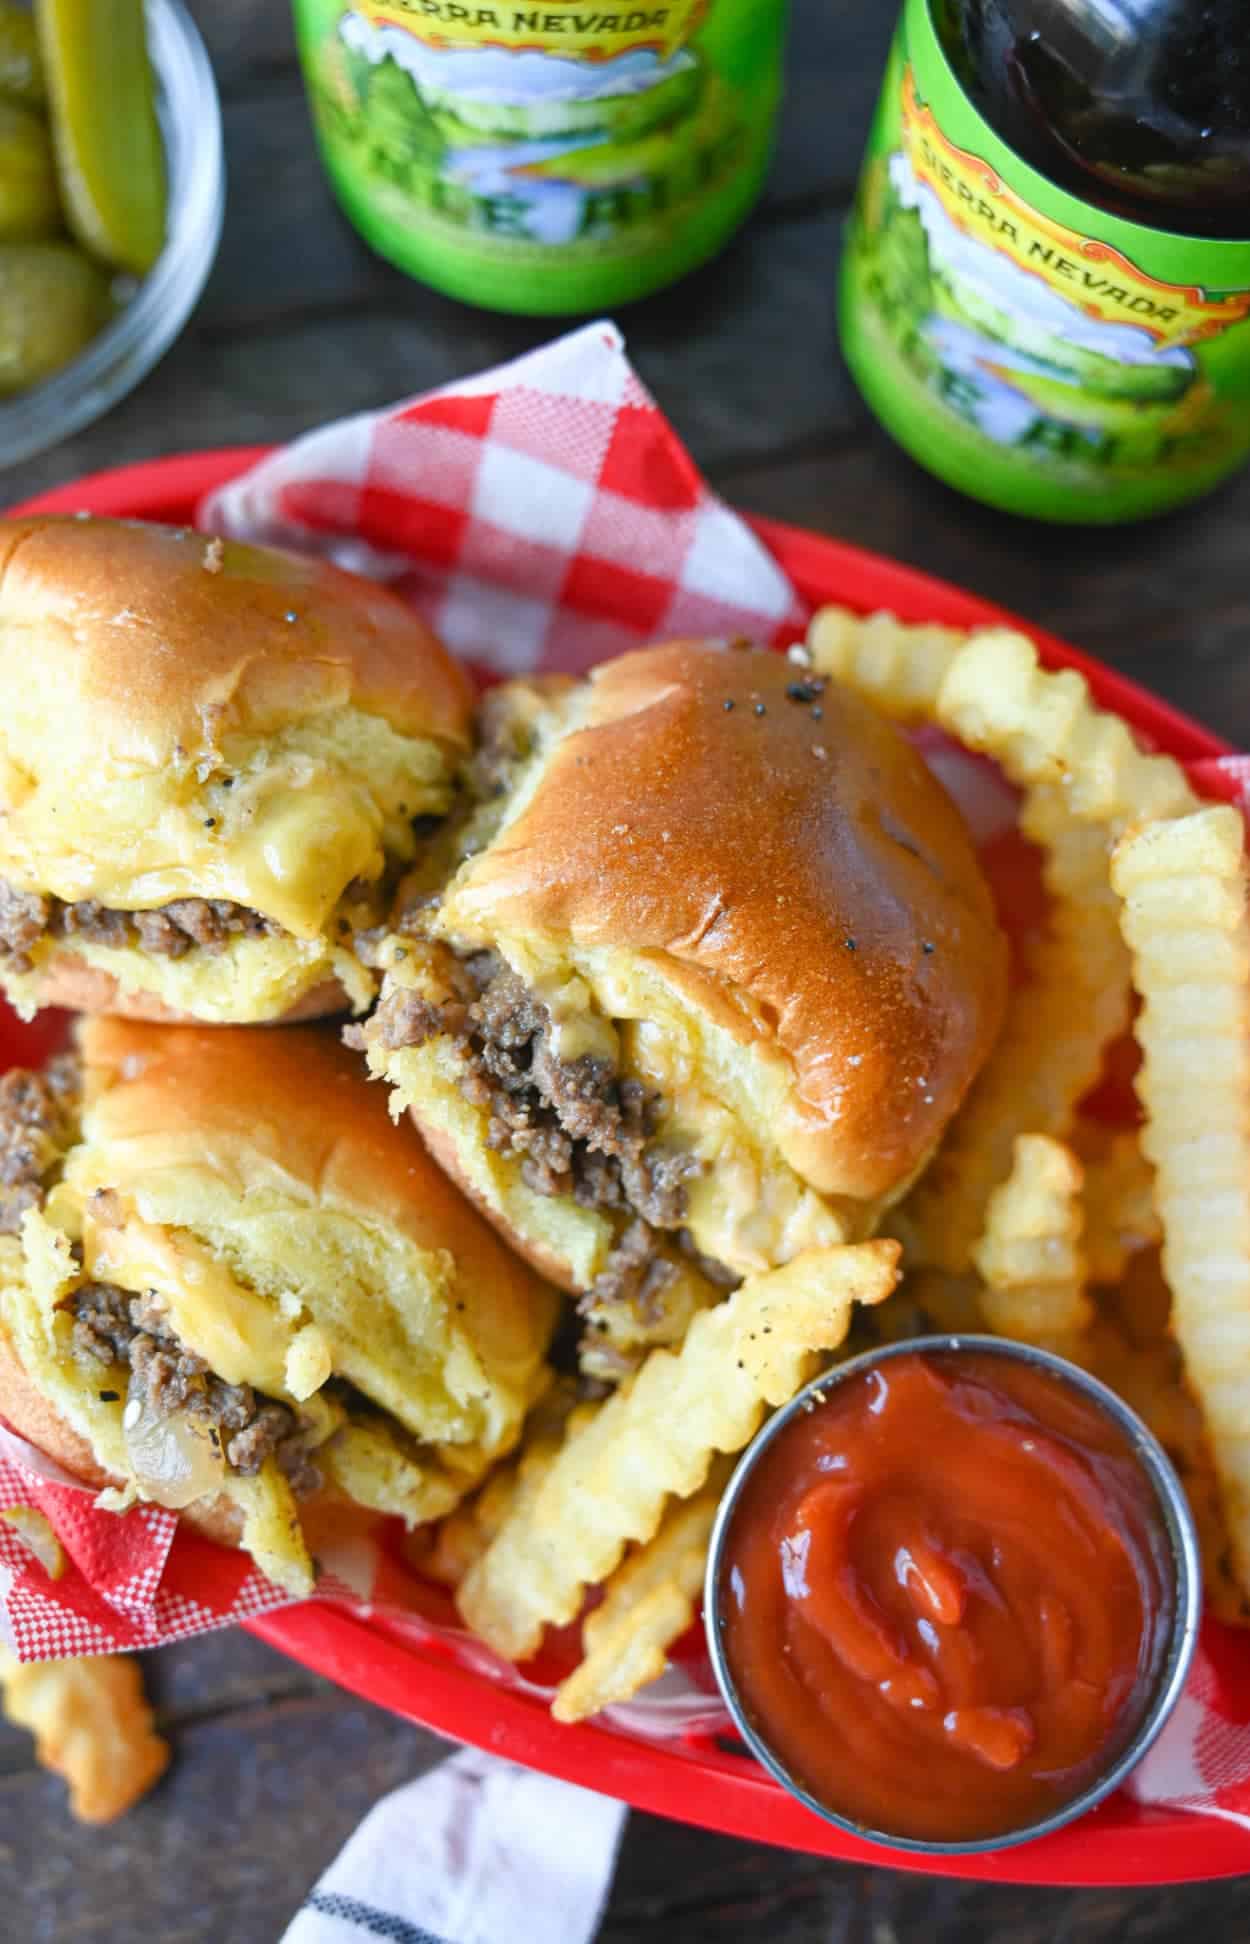 Three chopped cheeseburger sliders in a red serving basket with fries and ketchup.